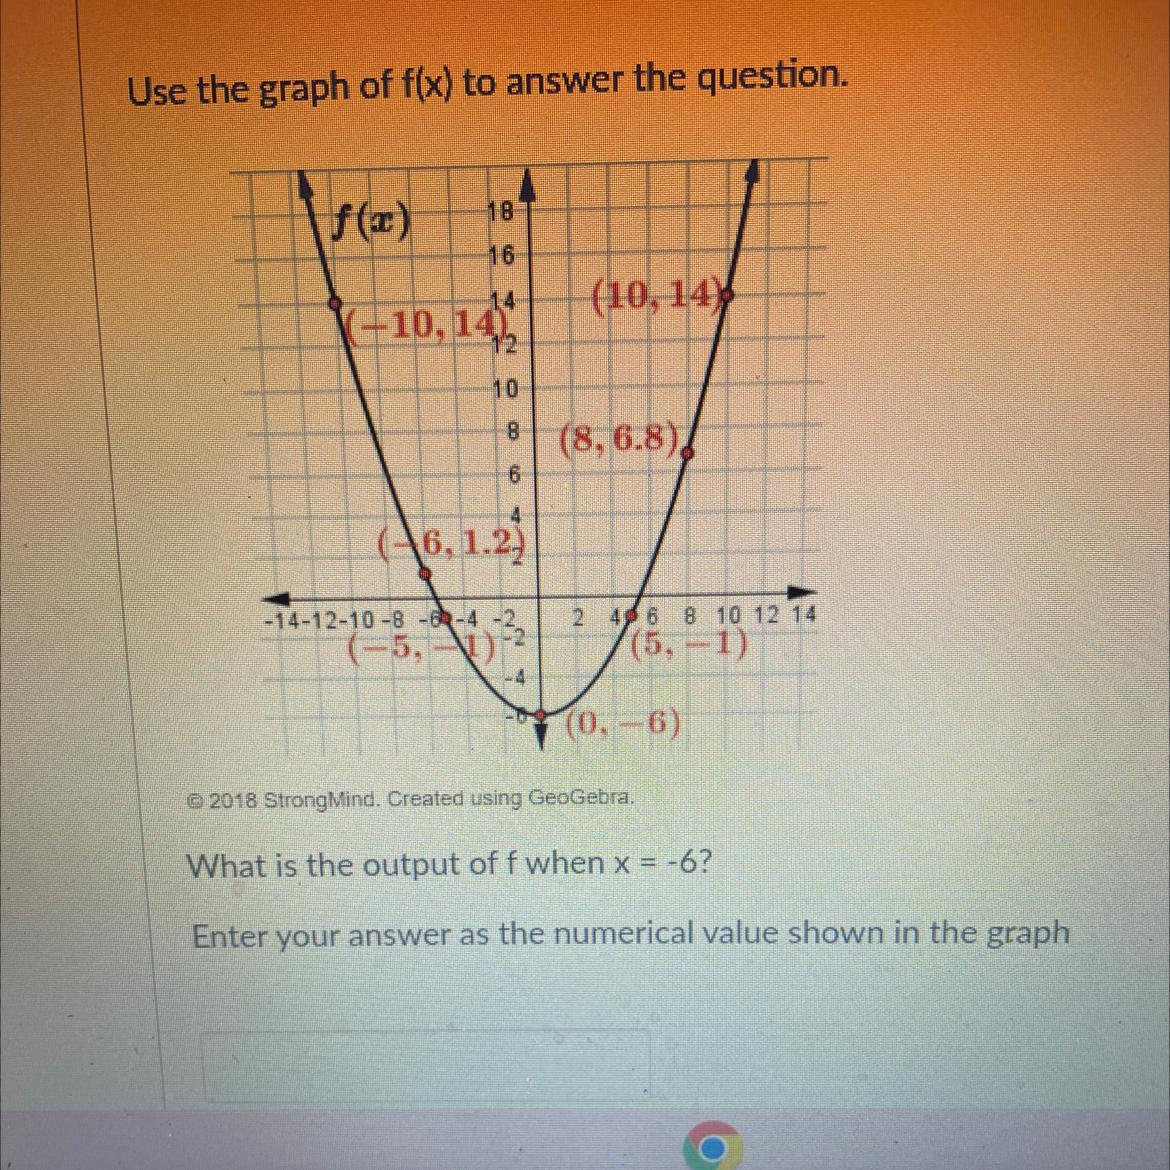 The Graph Of F(x) To Answer The Question.f(x) 1816-(-10, 14)10-6(-6, 1.2)-14-12-10-8-6-4-2(-5, -1)(10,